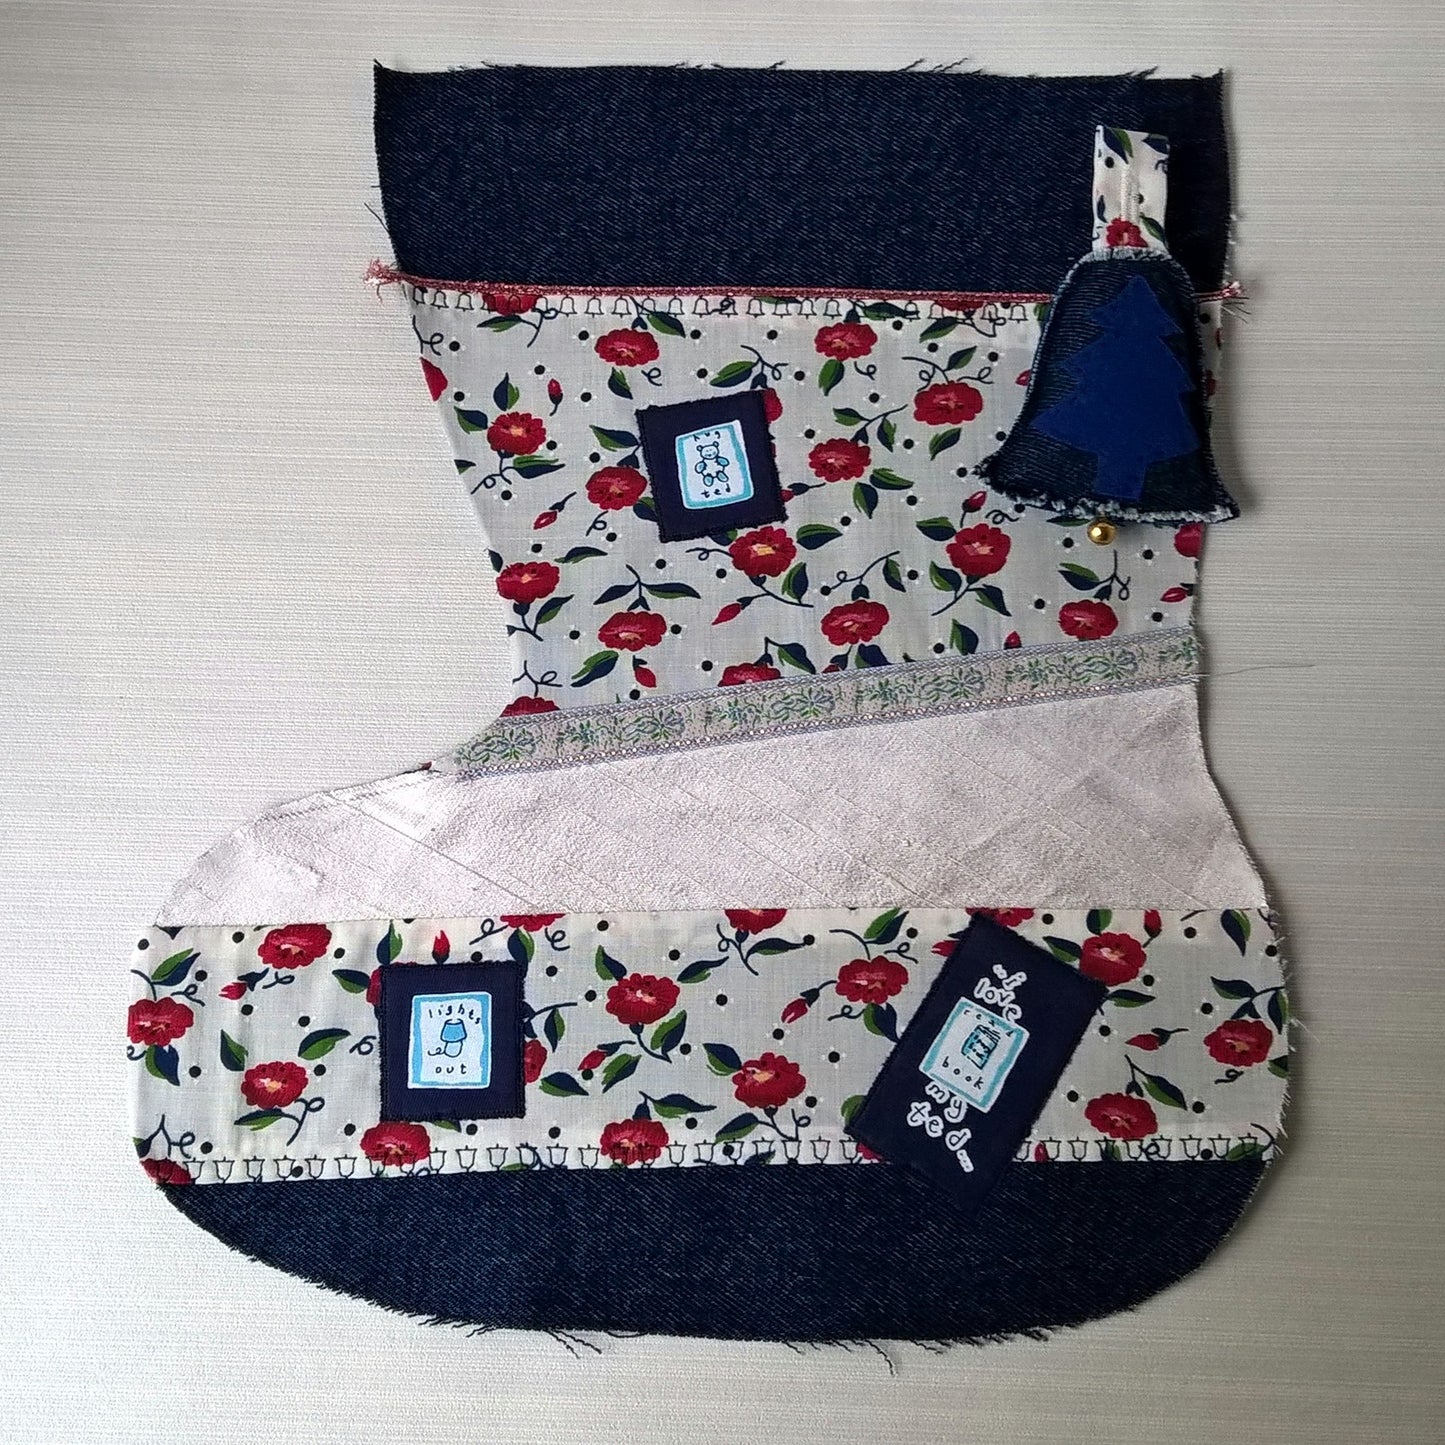 Christmas stocking with patch work applique and teddy motifs